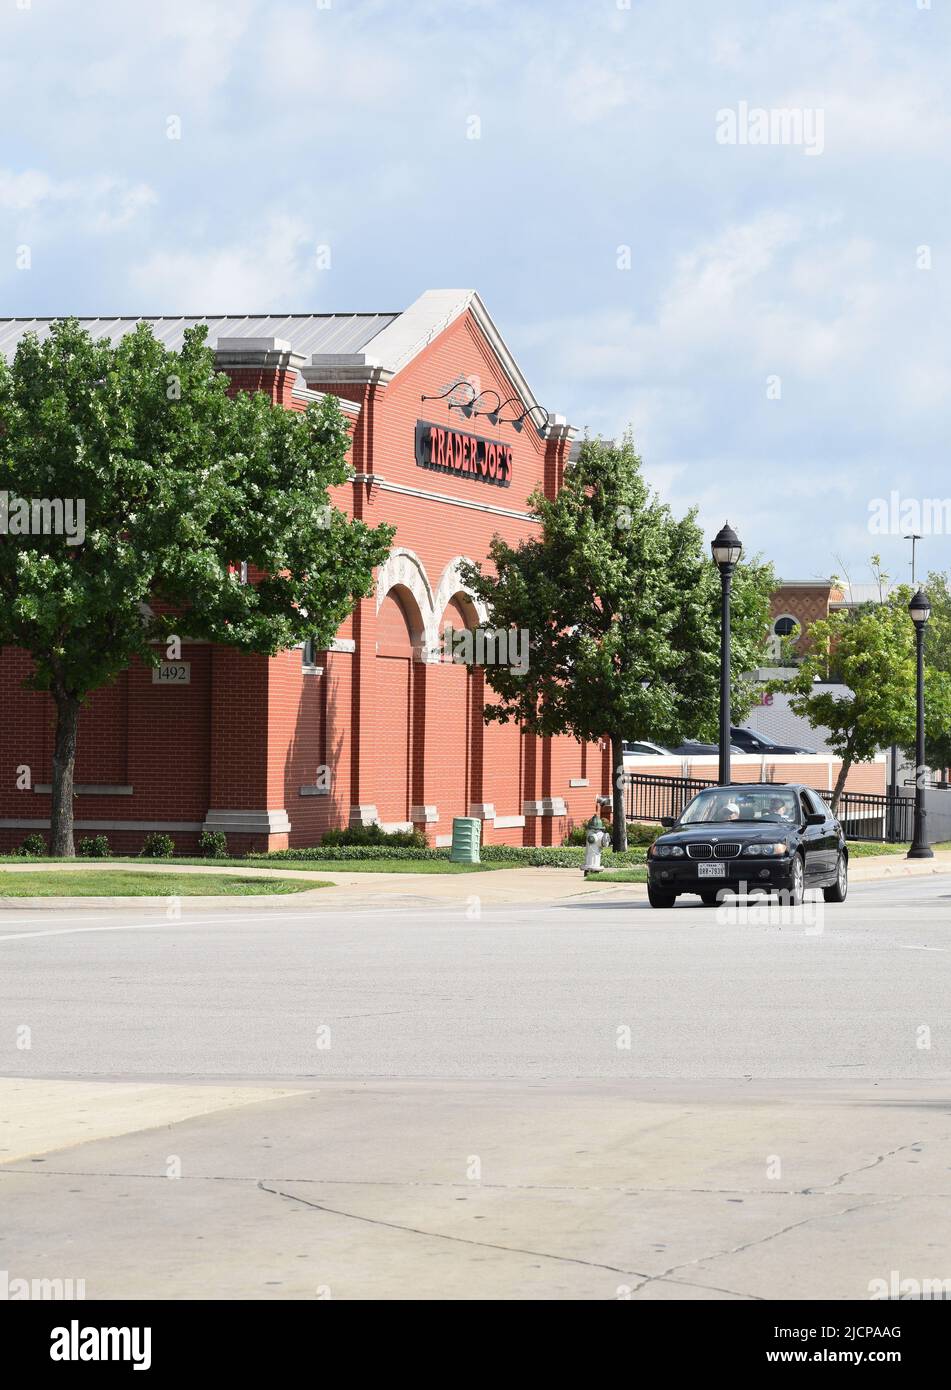 A black BMW car stopped at a traffic light next to a Trader Joe's grocery store in Southlake Texas Stock Photo